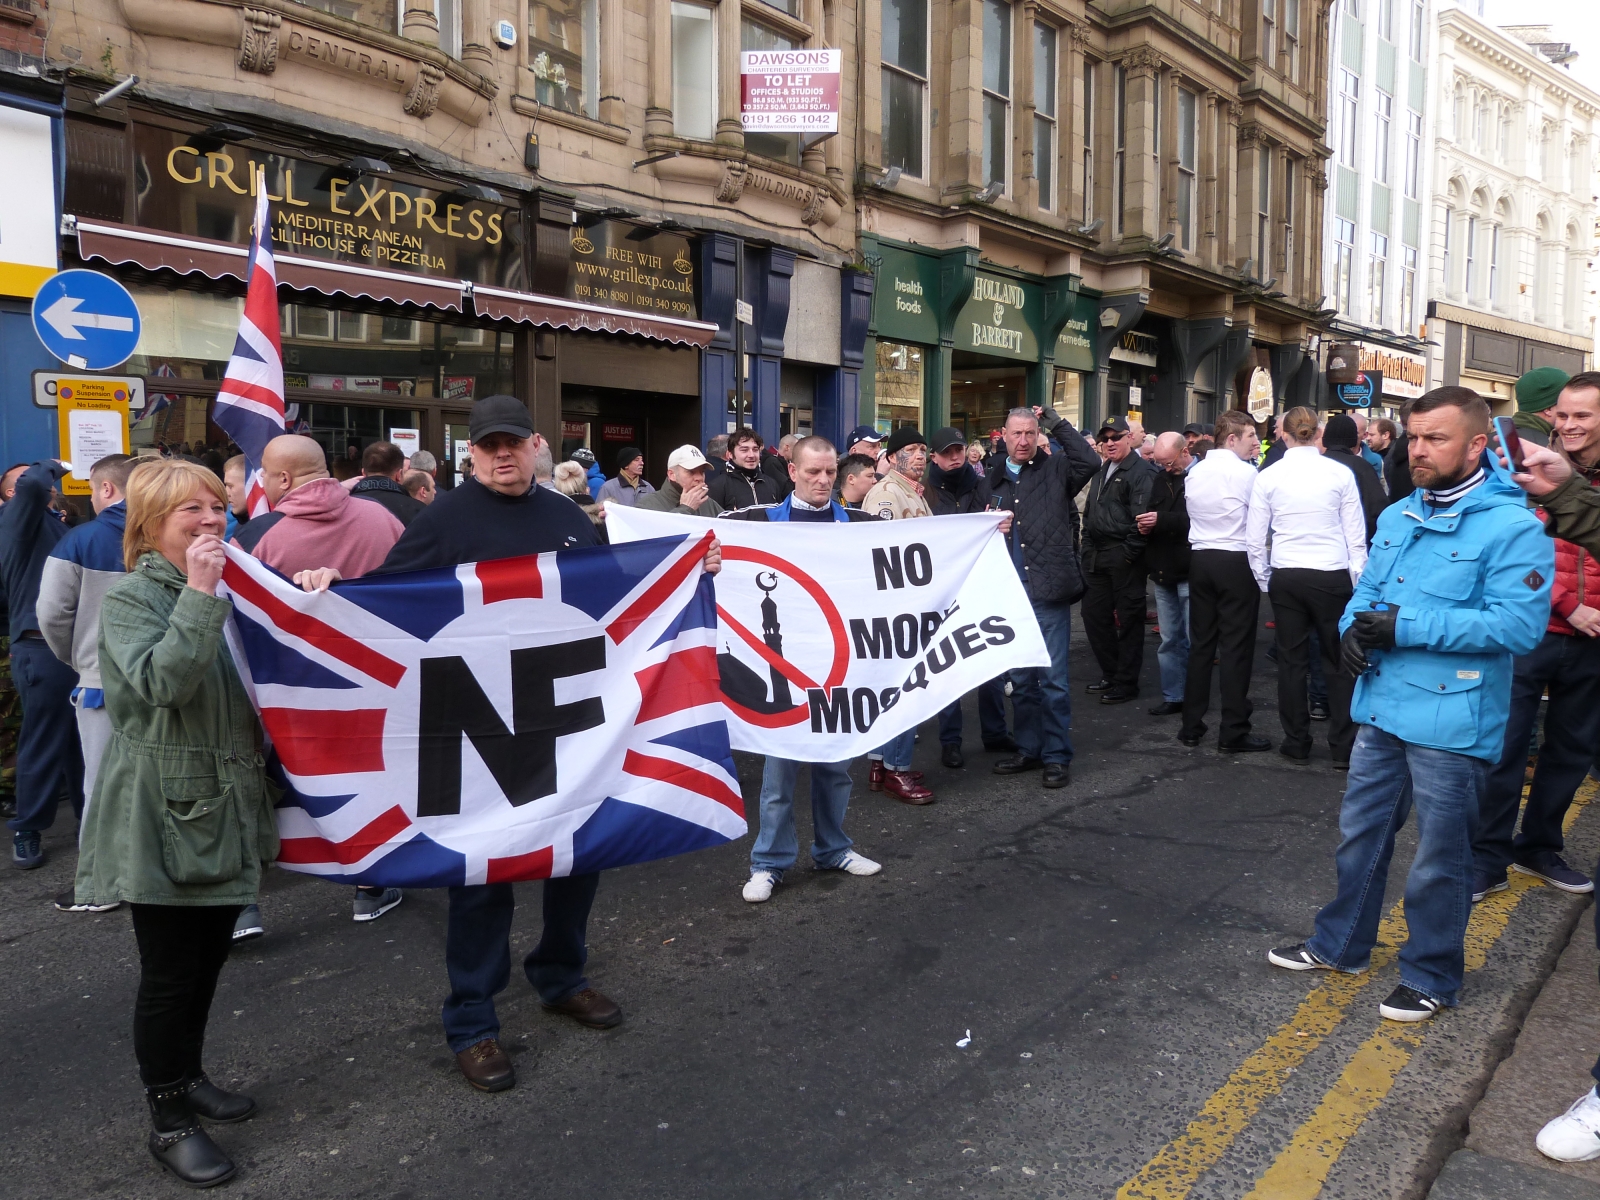 Neo-Nazis met with strong local resistance during Wigan march